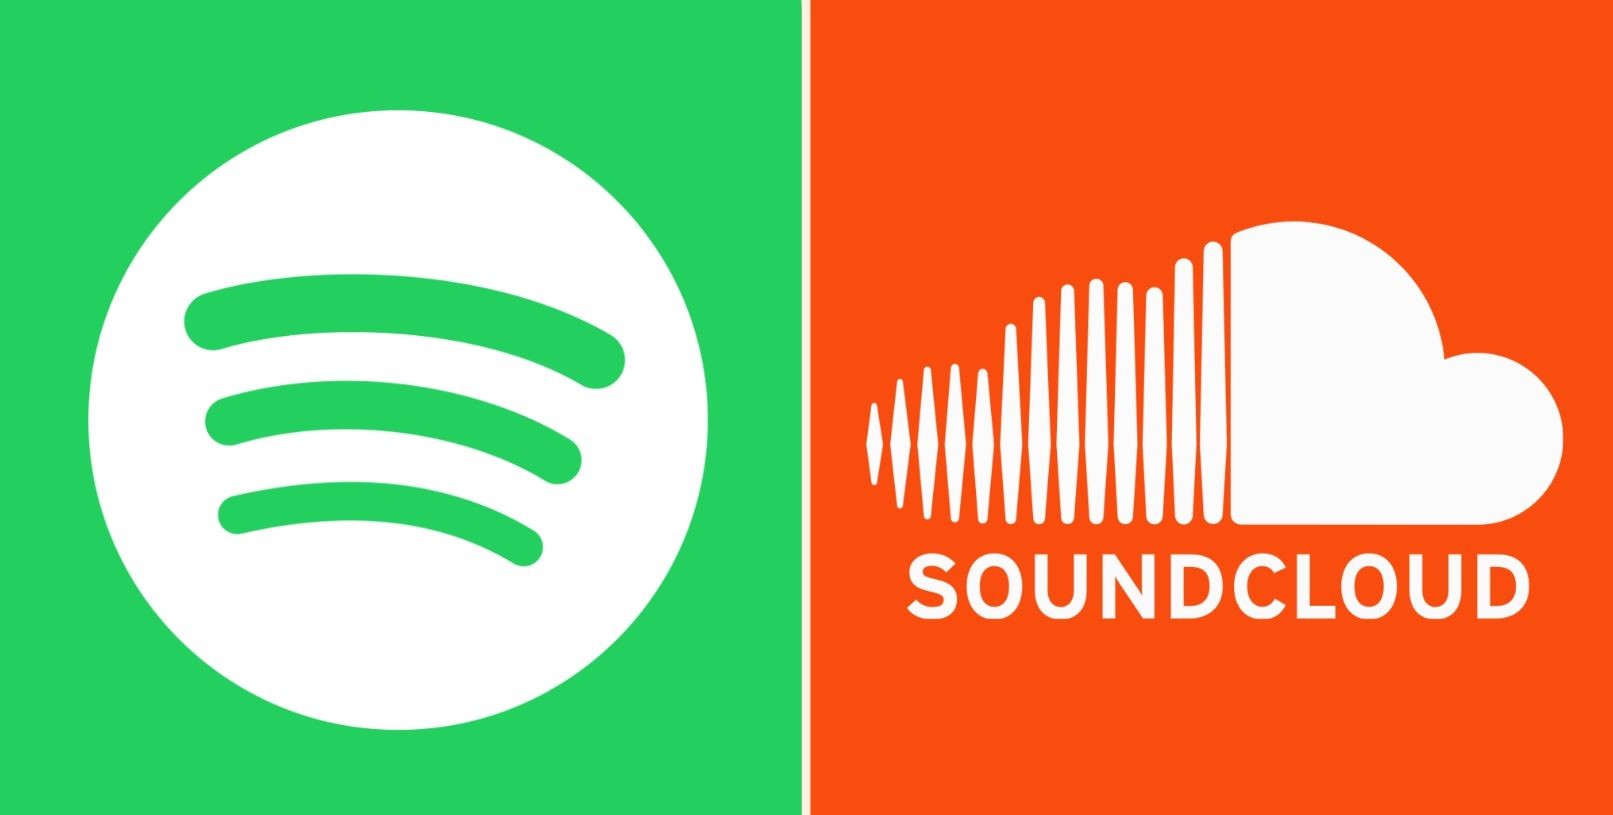 SoundCloud vs Spotify, Which One Is Better?